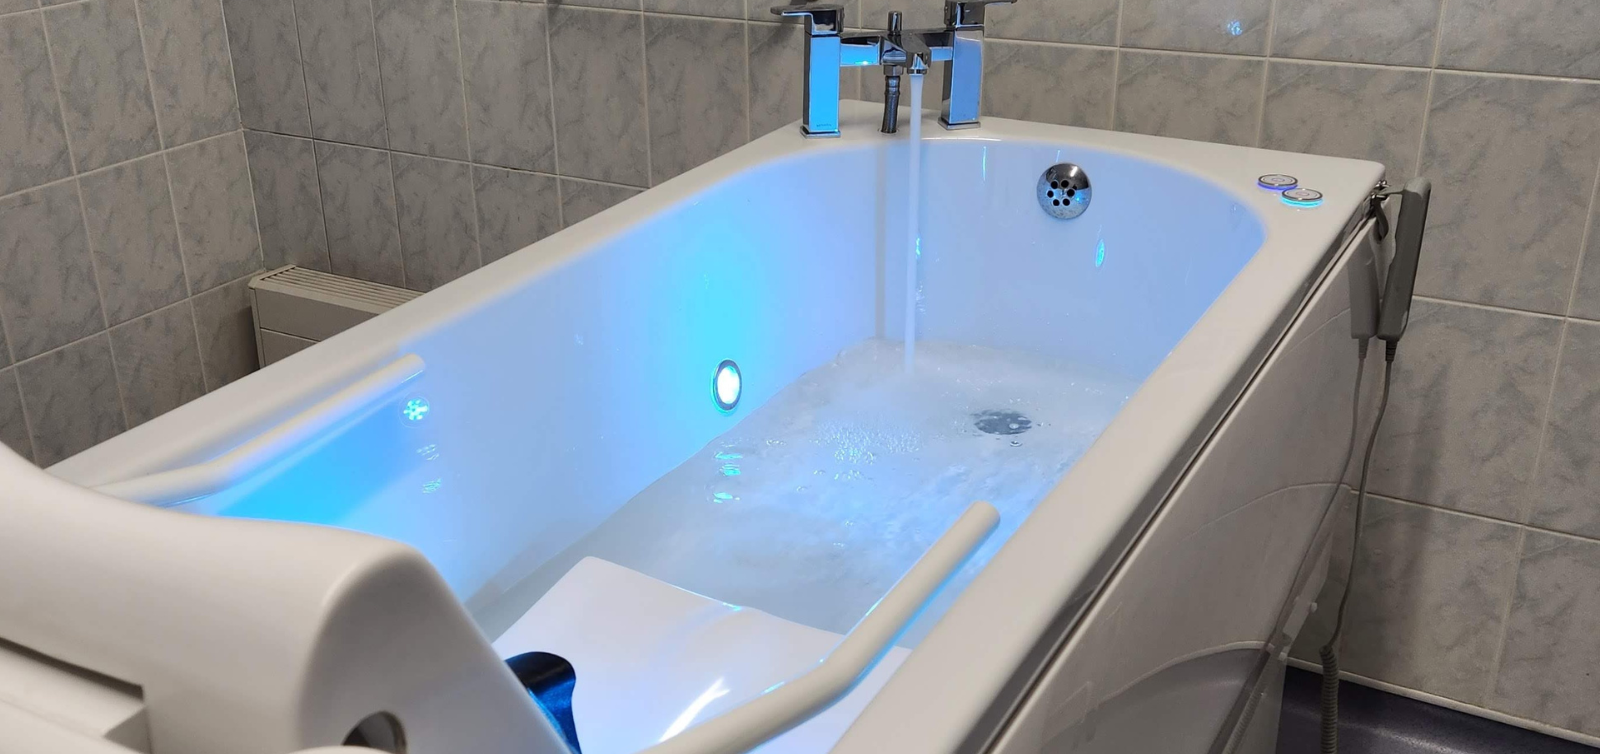 The Best Sensory Bath Solutions for the Care Industry